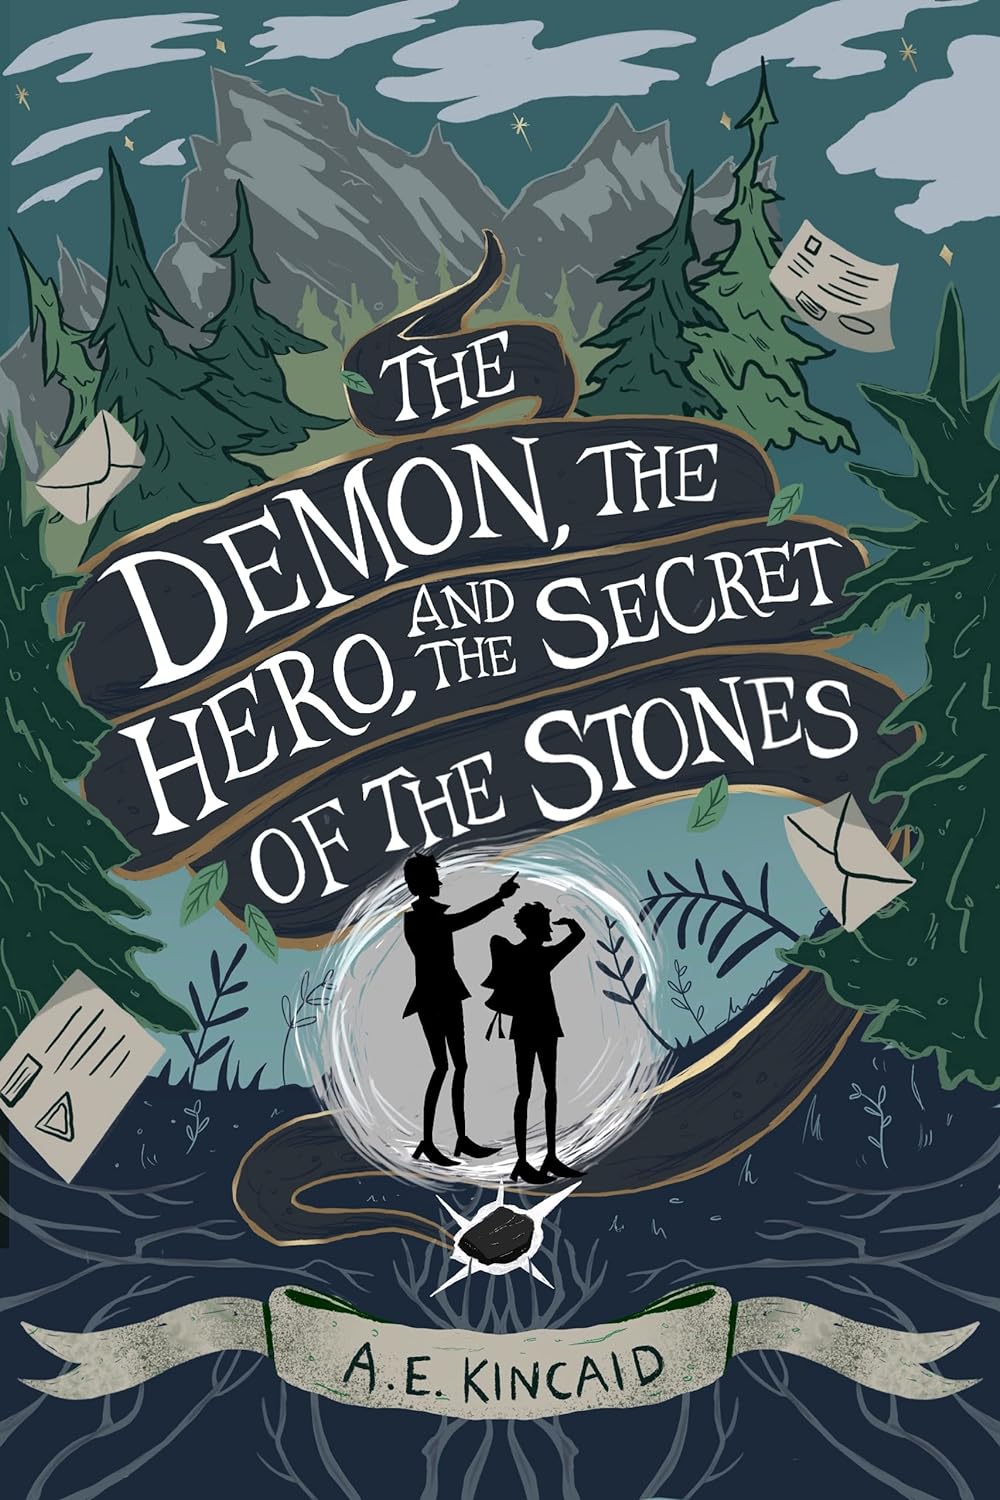 The Demon, the Hero, and the Secret of the Stones - by A. E. Kincaid